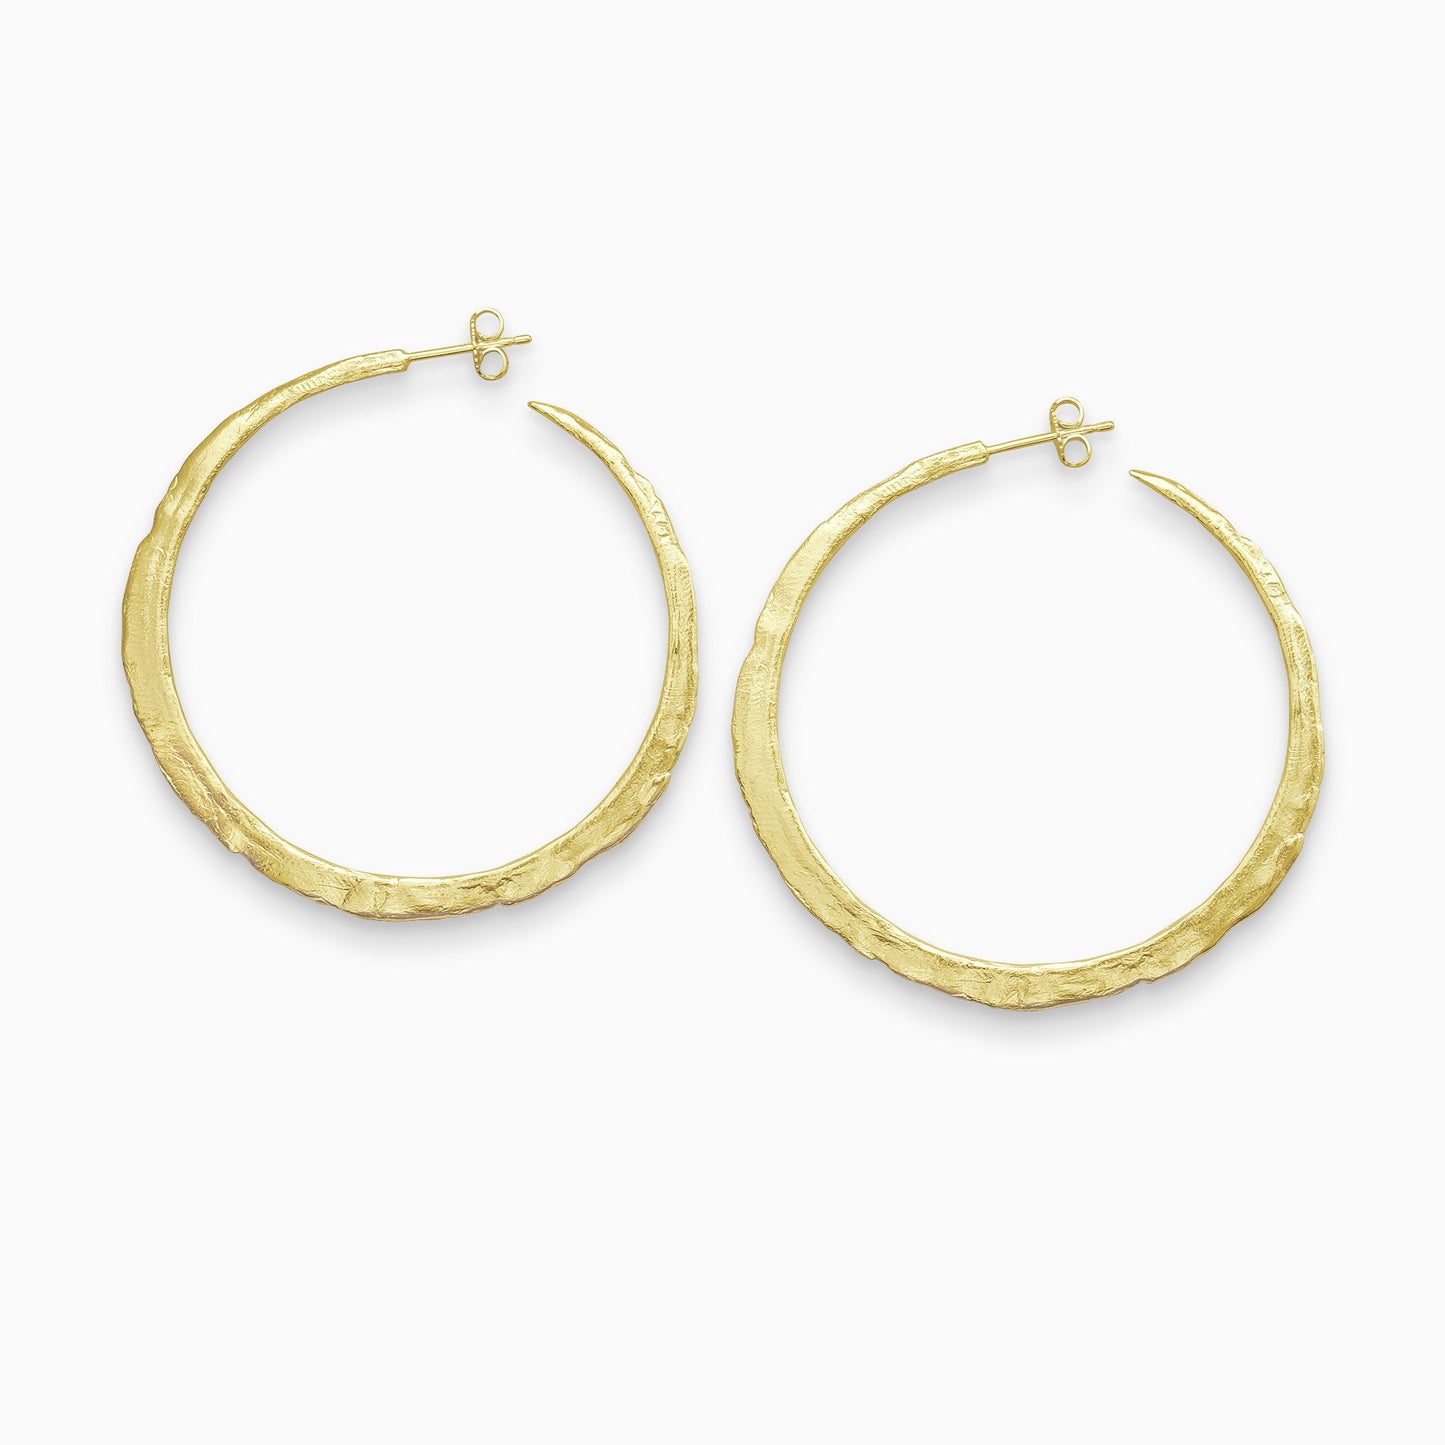 A pair of 18ct Fairtrade yellow gold round hoop earrings with a stud fastening. Organic texture and and tapering from bottom centre to the top. 55mm outside diameter.